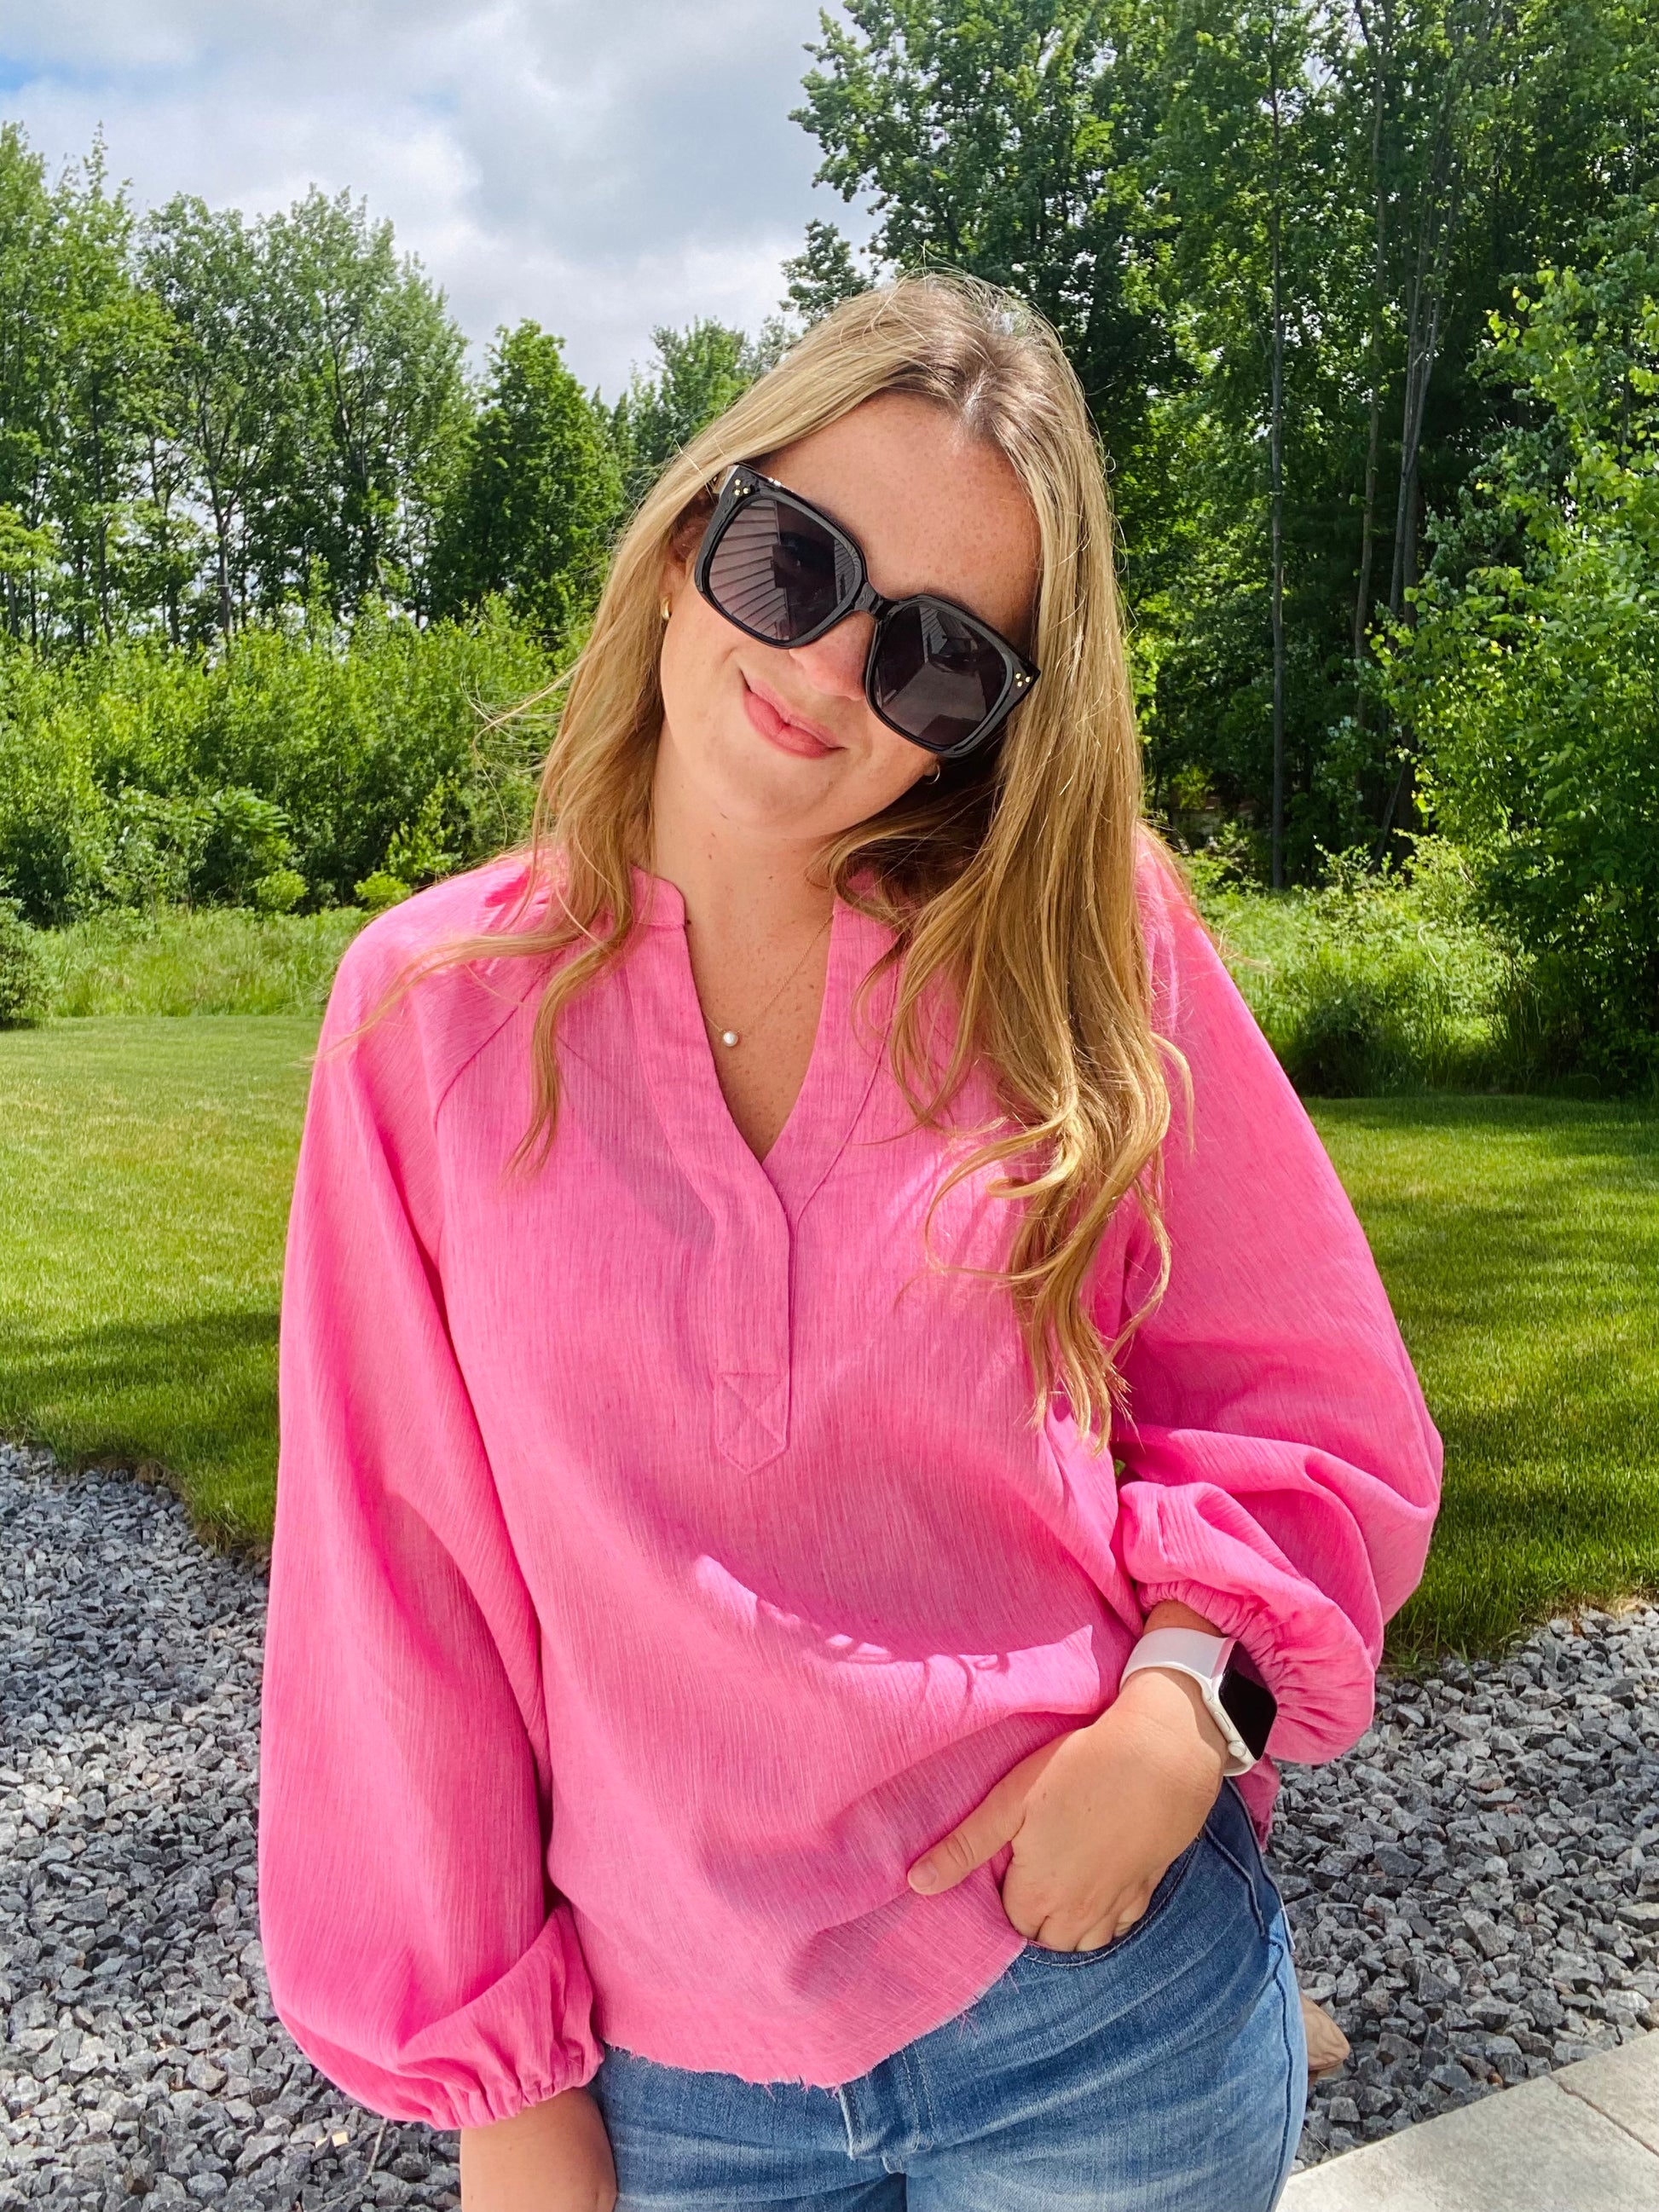 Introducing the Bubblegum Pink Woven Gauze Blouse, a stylish piece featuring V Neck Placket with Snap Closure, Raw Cut Edge Hem with Facing, Raglan Cut Bubble Sleeves, Gathered Neckline, Elasticized Wrists, and a Banded Collar. This garment is crafted with superior materials for a comfortable, timeless look.